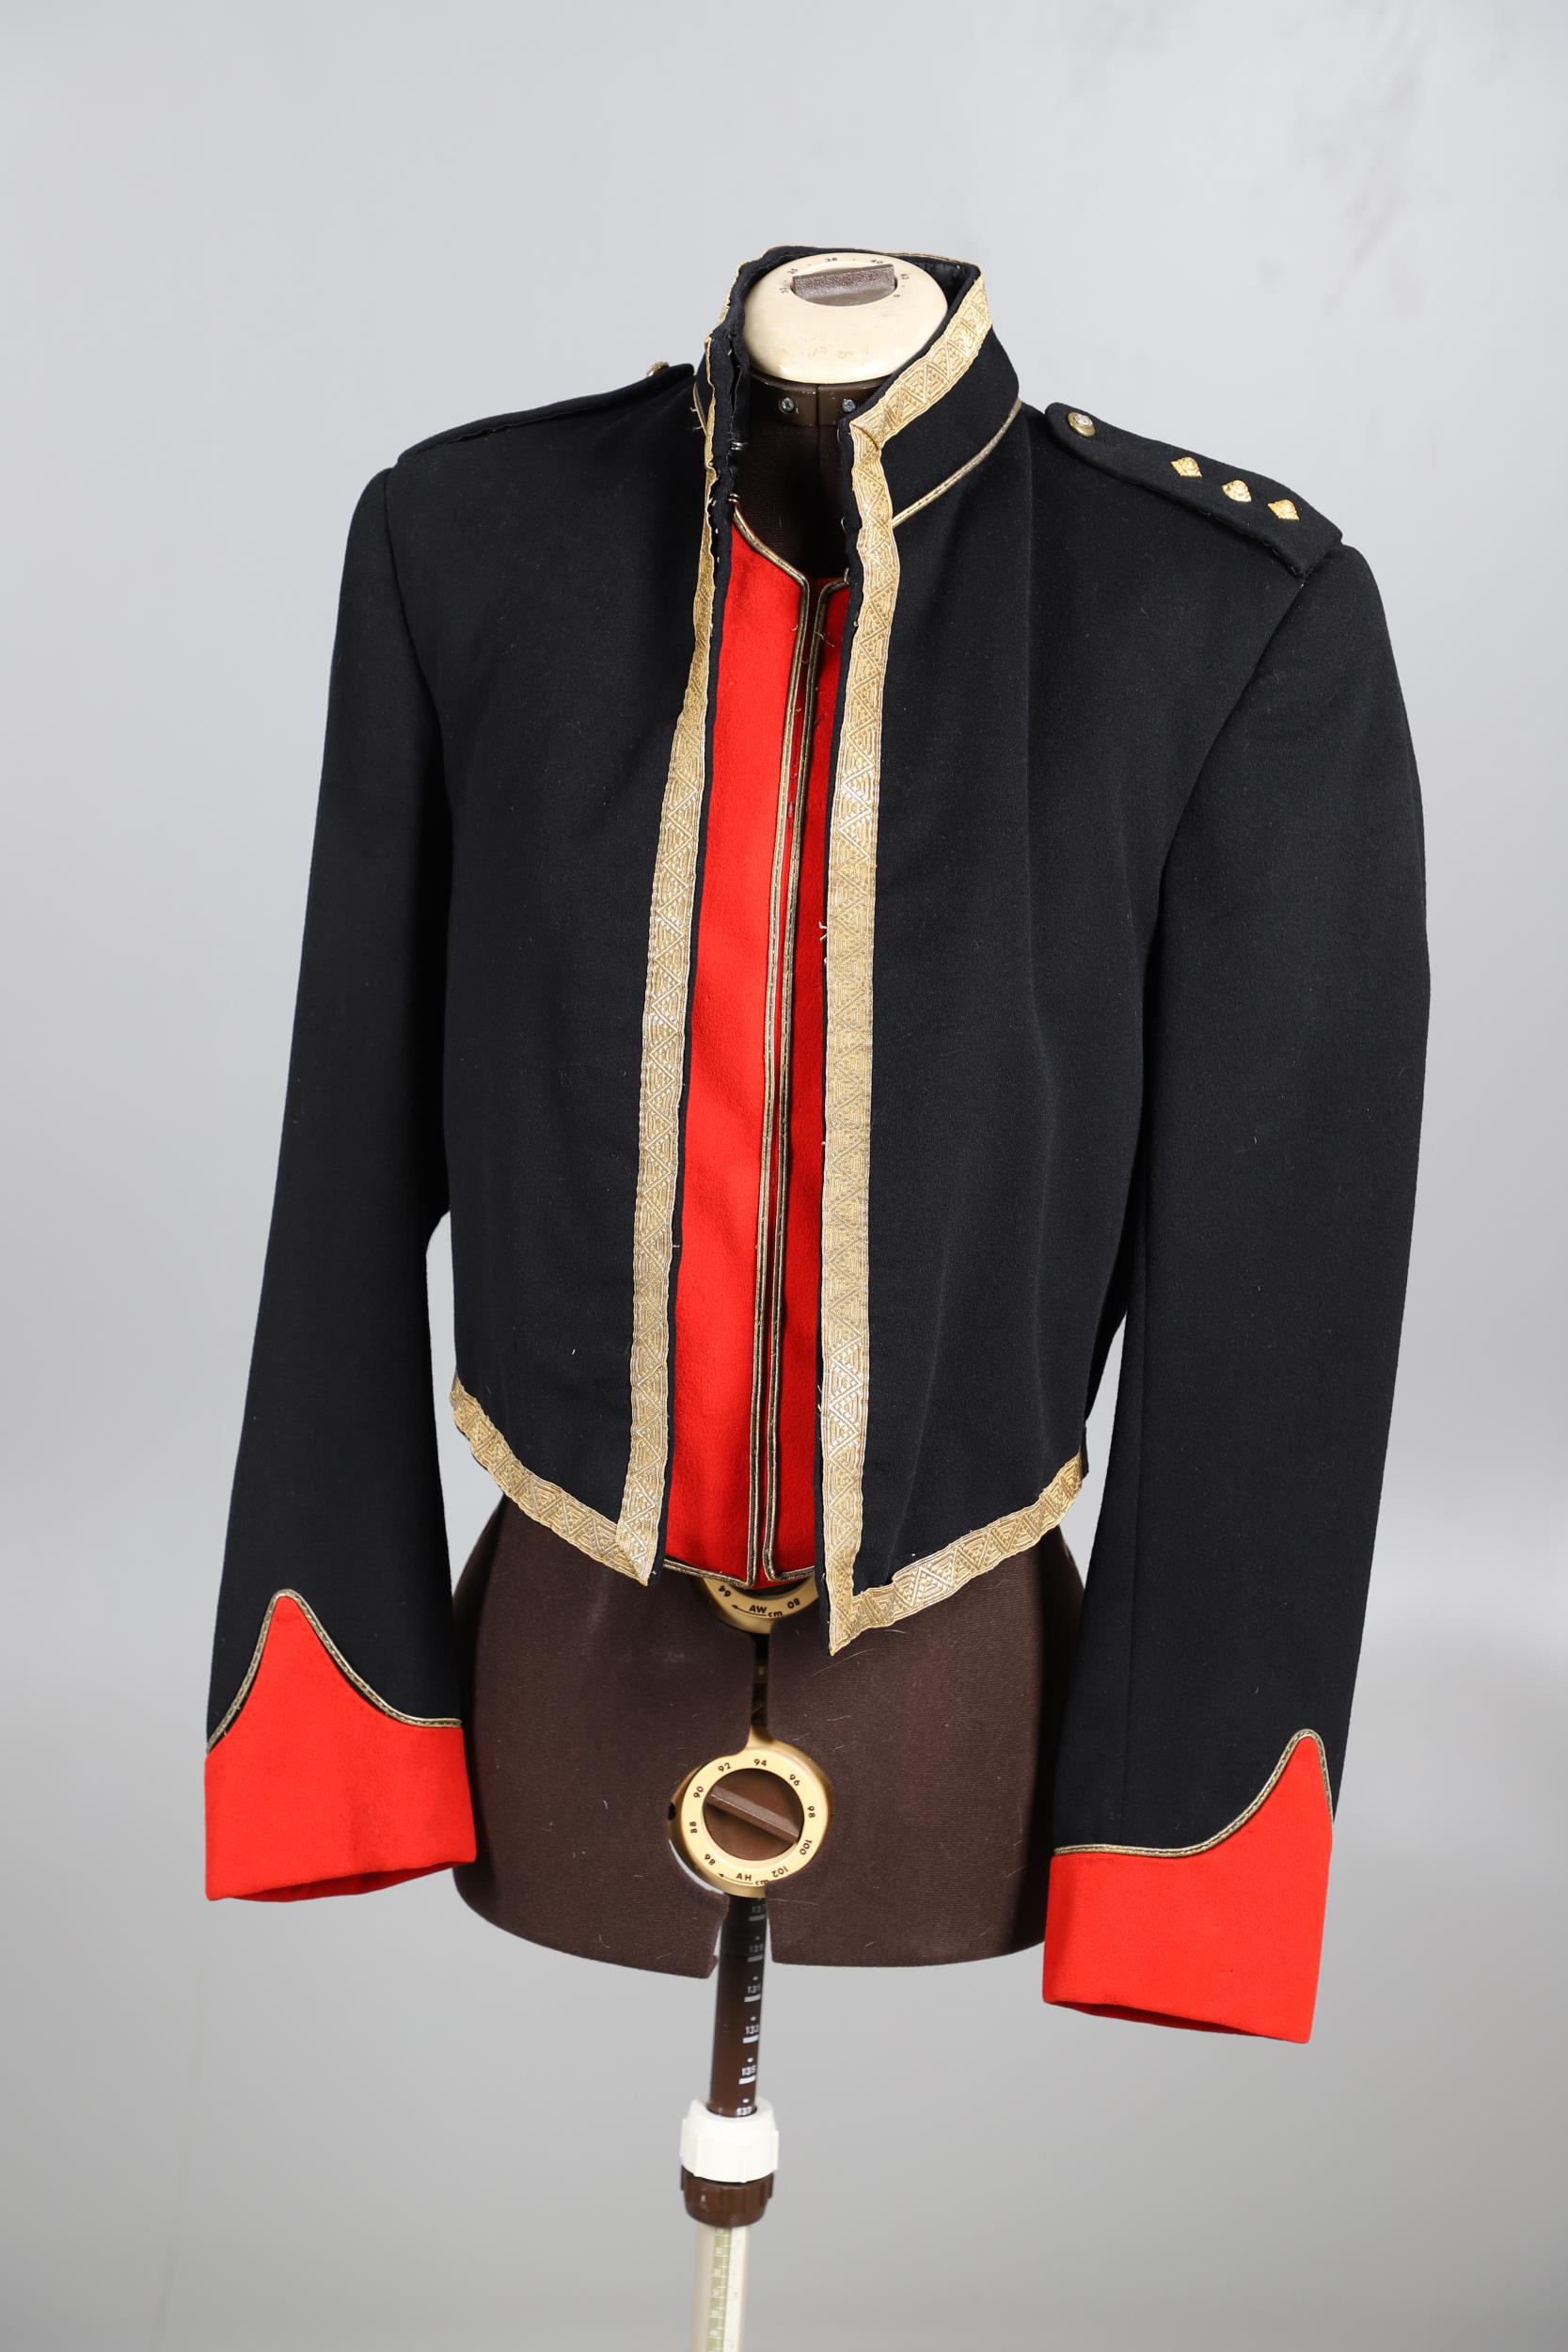 A POST SECOND WORLD WAR MESS JACKET AND BLUES UNIFORM FOR THE 15/19TH HUSSARS. - Image 16 of 34